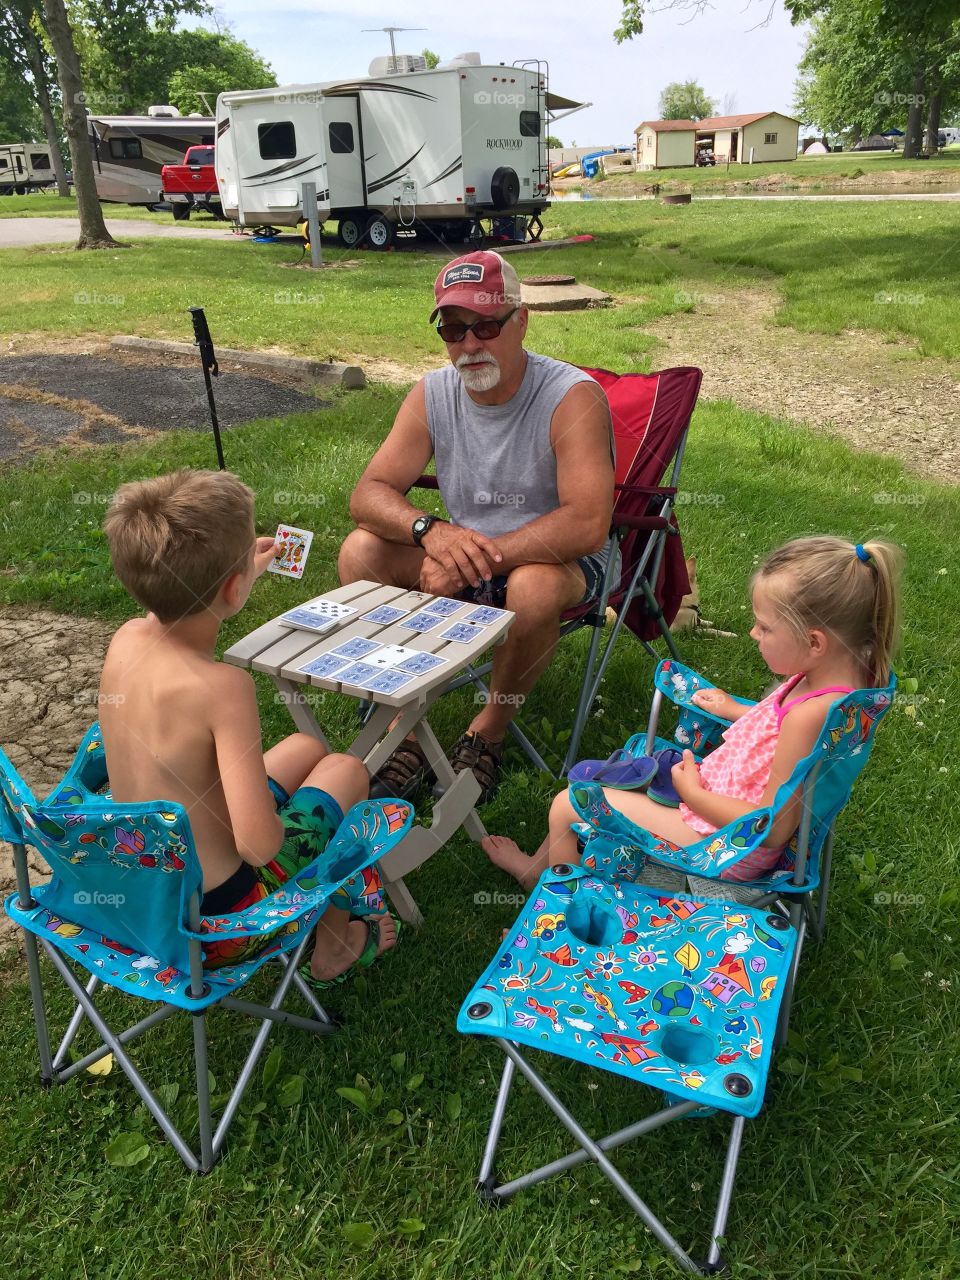 Big Card game at the campground 